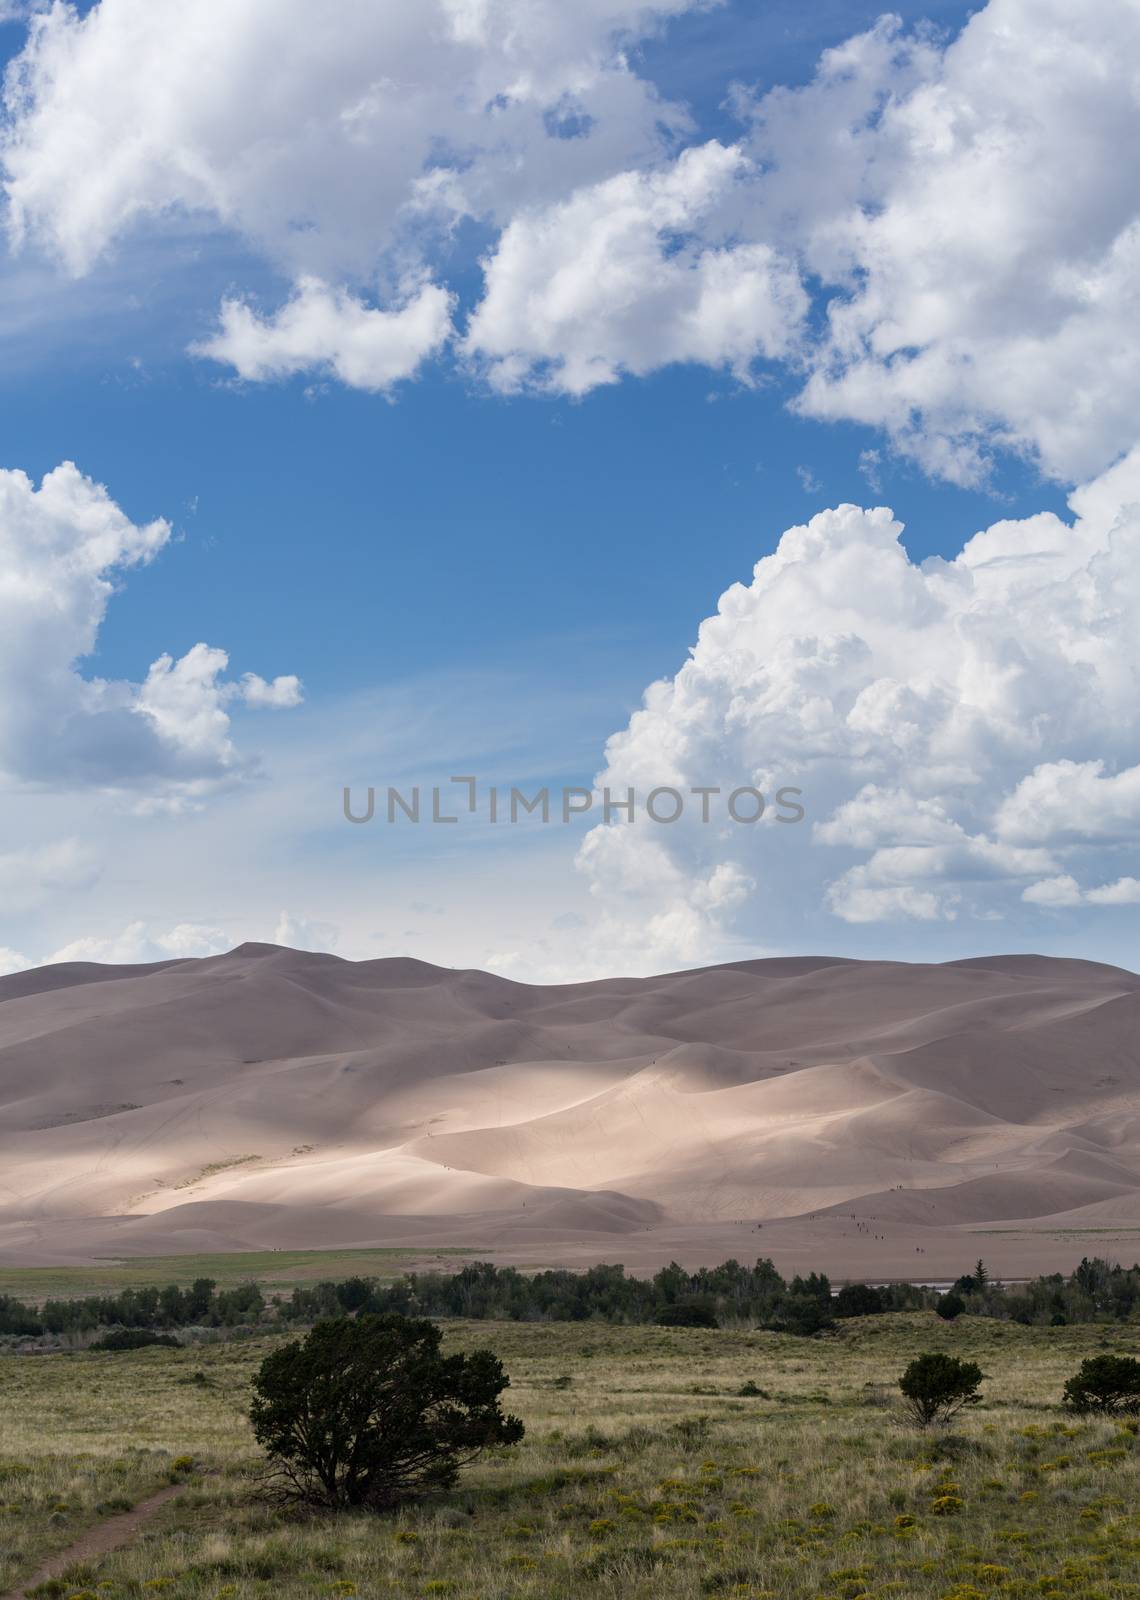 Detailed shot of the shadows on the dunes at Great Sand Dunes National Park in Colorado with the tiny people walking on the sand giving some scale to the dunes